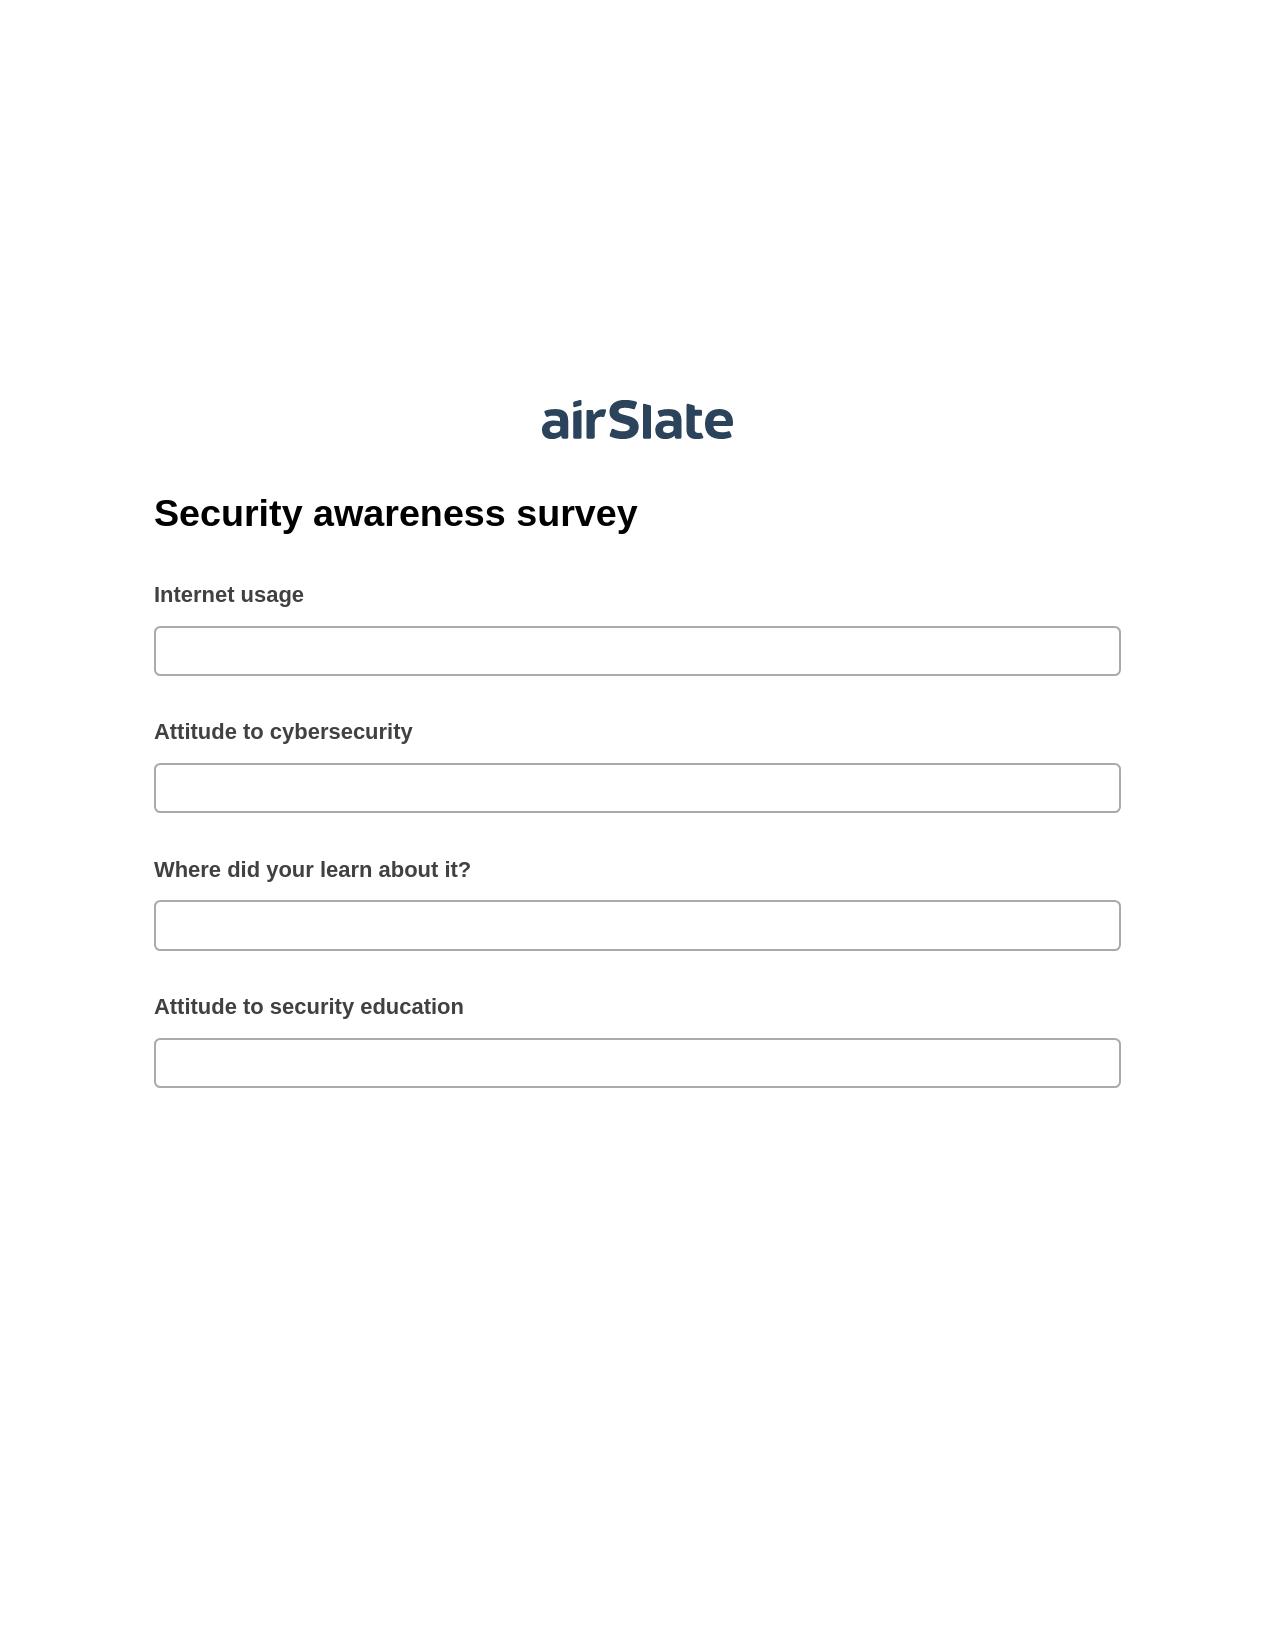 Security awareness survey Pre-fill from Salesforce Records with SOQL Bot, Create Slate from another Flow Bot, Export to Excel 365 Bot